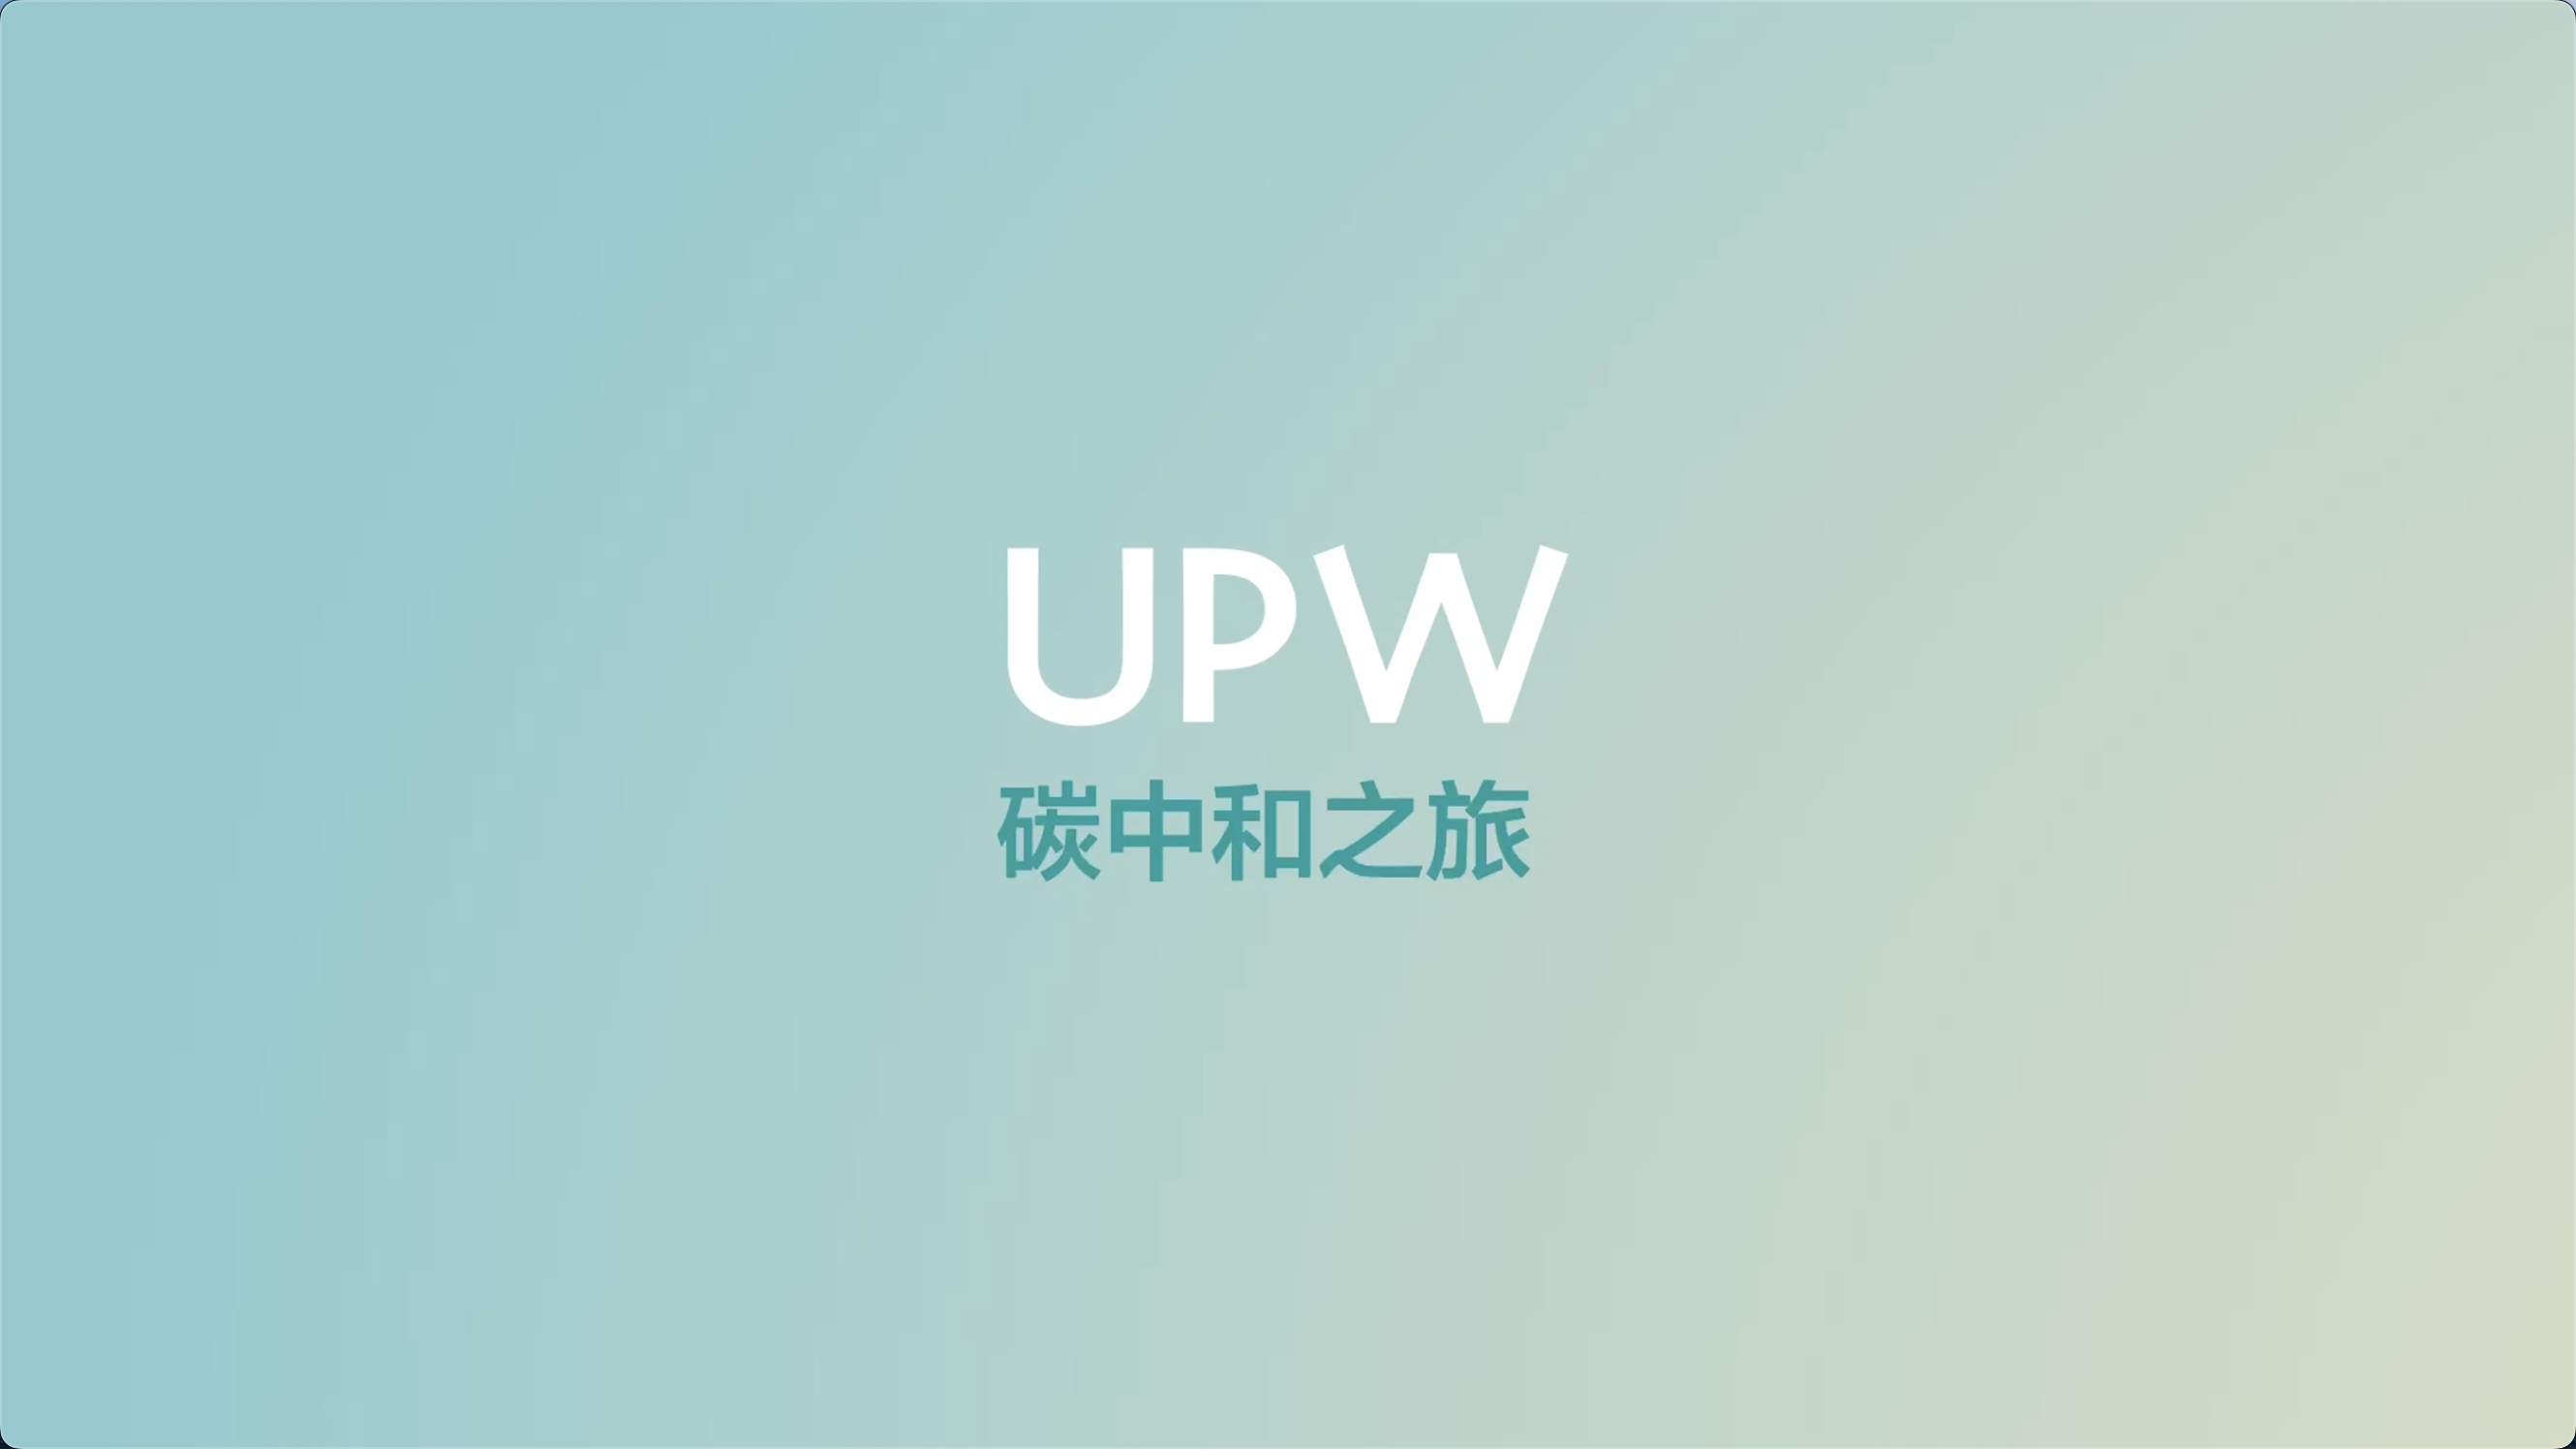 Series of Low-Carbon Transformation (I) | Carbon Neutrality Journey of UPW